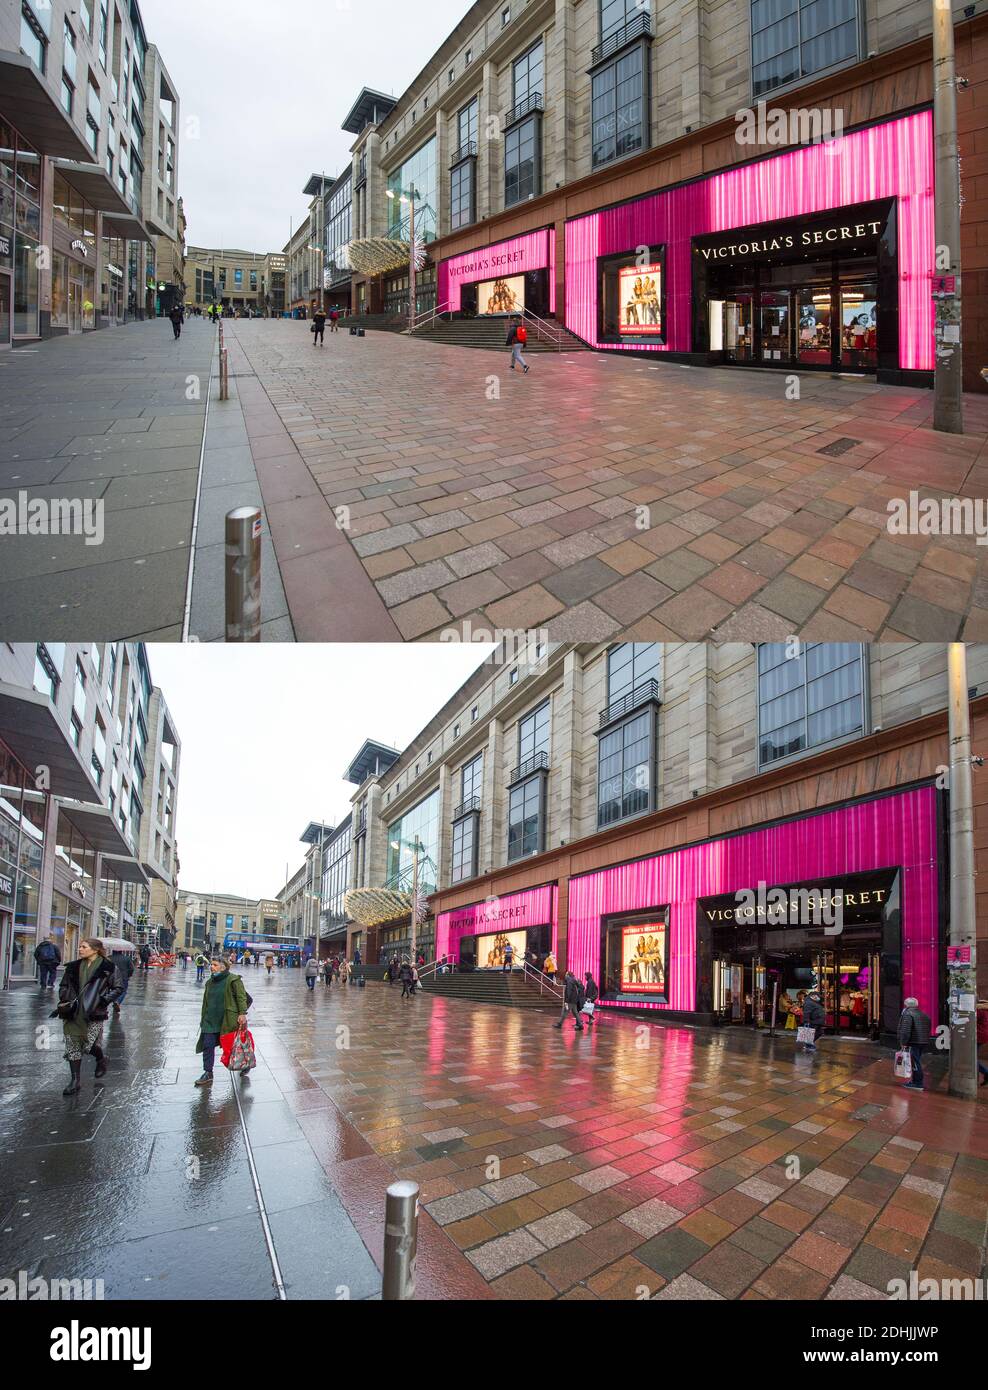 Glasgow, Scotland, UK. 11th Dec, 2020. Pictured: The top end of Buchanan Street; (left) Image taken 10th December. (right) image taken today, 11th December. Composite images taken 24 hours apart, showing Glasgow's city ‘style mile' which is Buchanan Street showing the quiet scenes when it was in phase 4 lockdown on the 10th December 2020. Today 11th December Glasgow is in phase 3 lockdown where all non-essential shops are open, giving shoppers the chance to grab a last minute bargain for Christmas. Credit: Colin Fisher/Alamy Live News Stock Photo